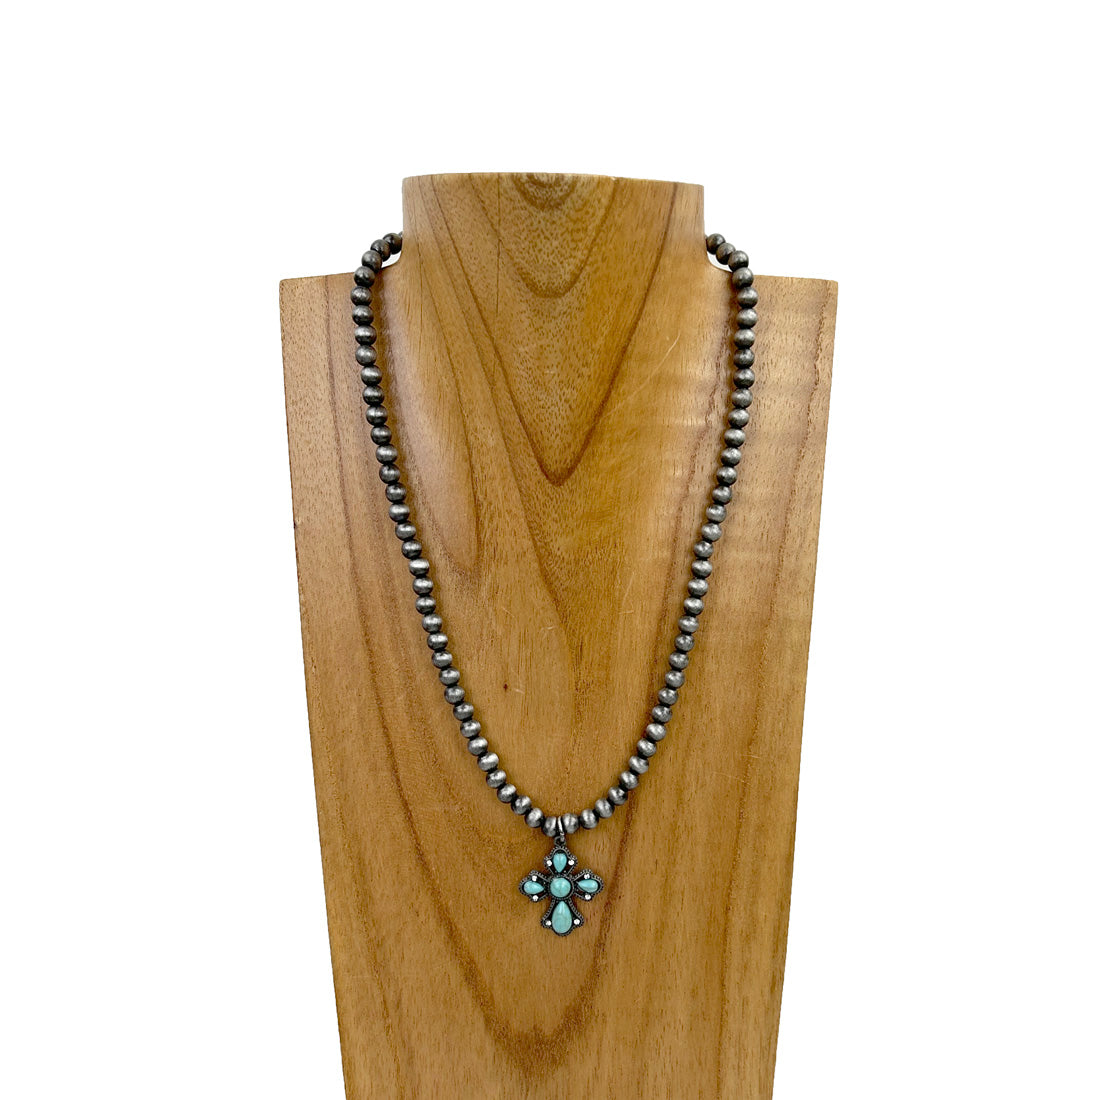 NKY210310-03SL-BLUE        17 inches 6mm silver Navajo pearl beads with small blue turquoise cross Necklace